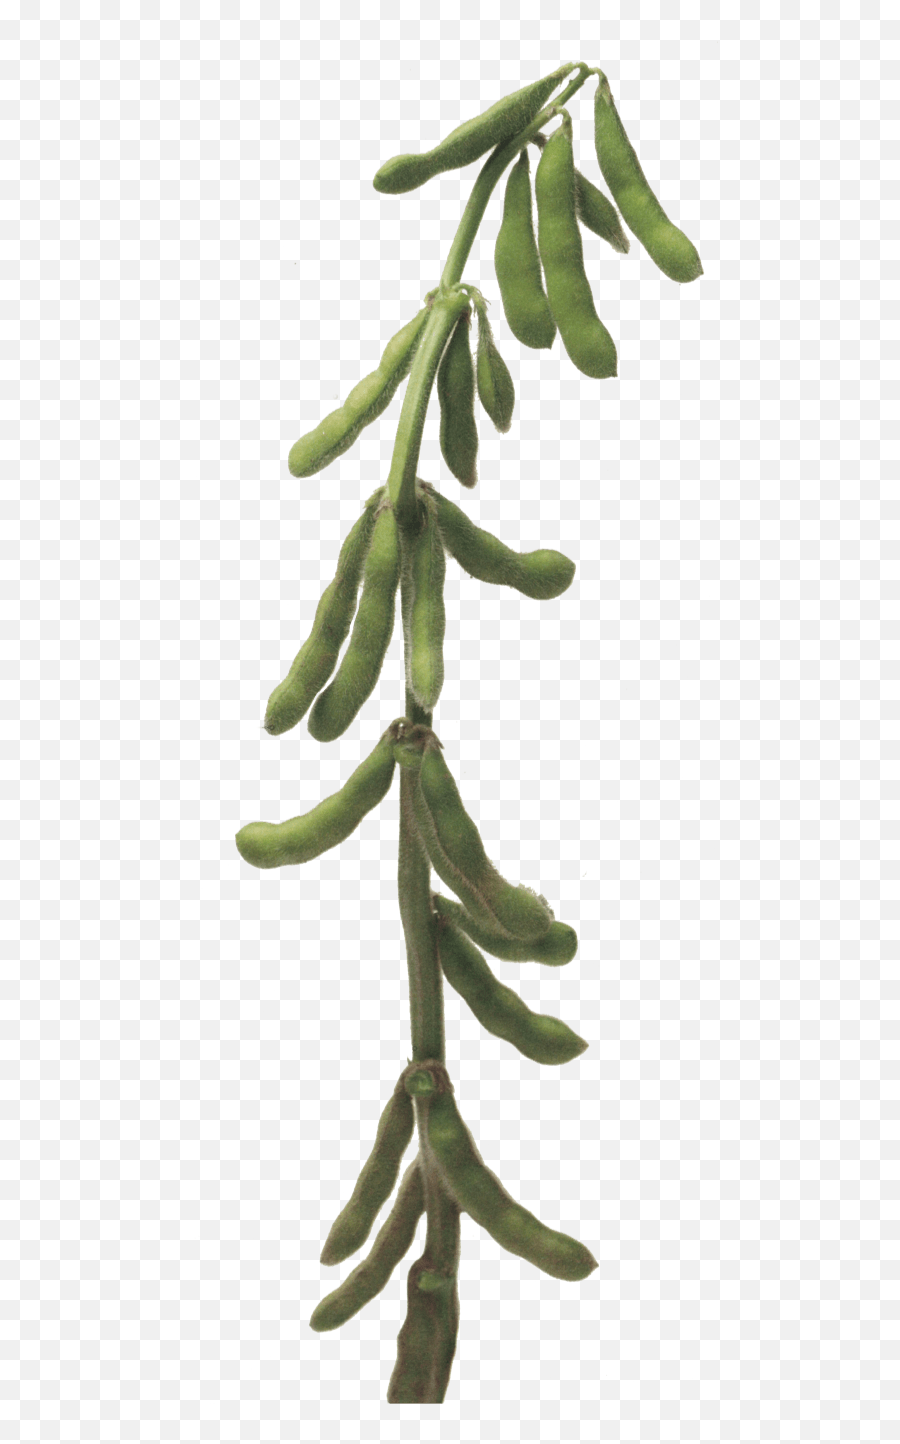 Food - Soybeans Transparent Soybean Plant Png Emoji,Soybean Clipart